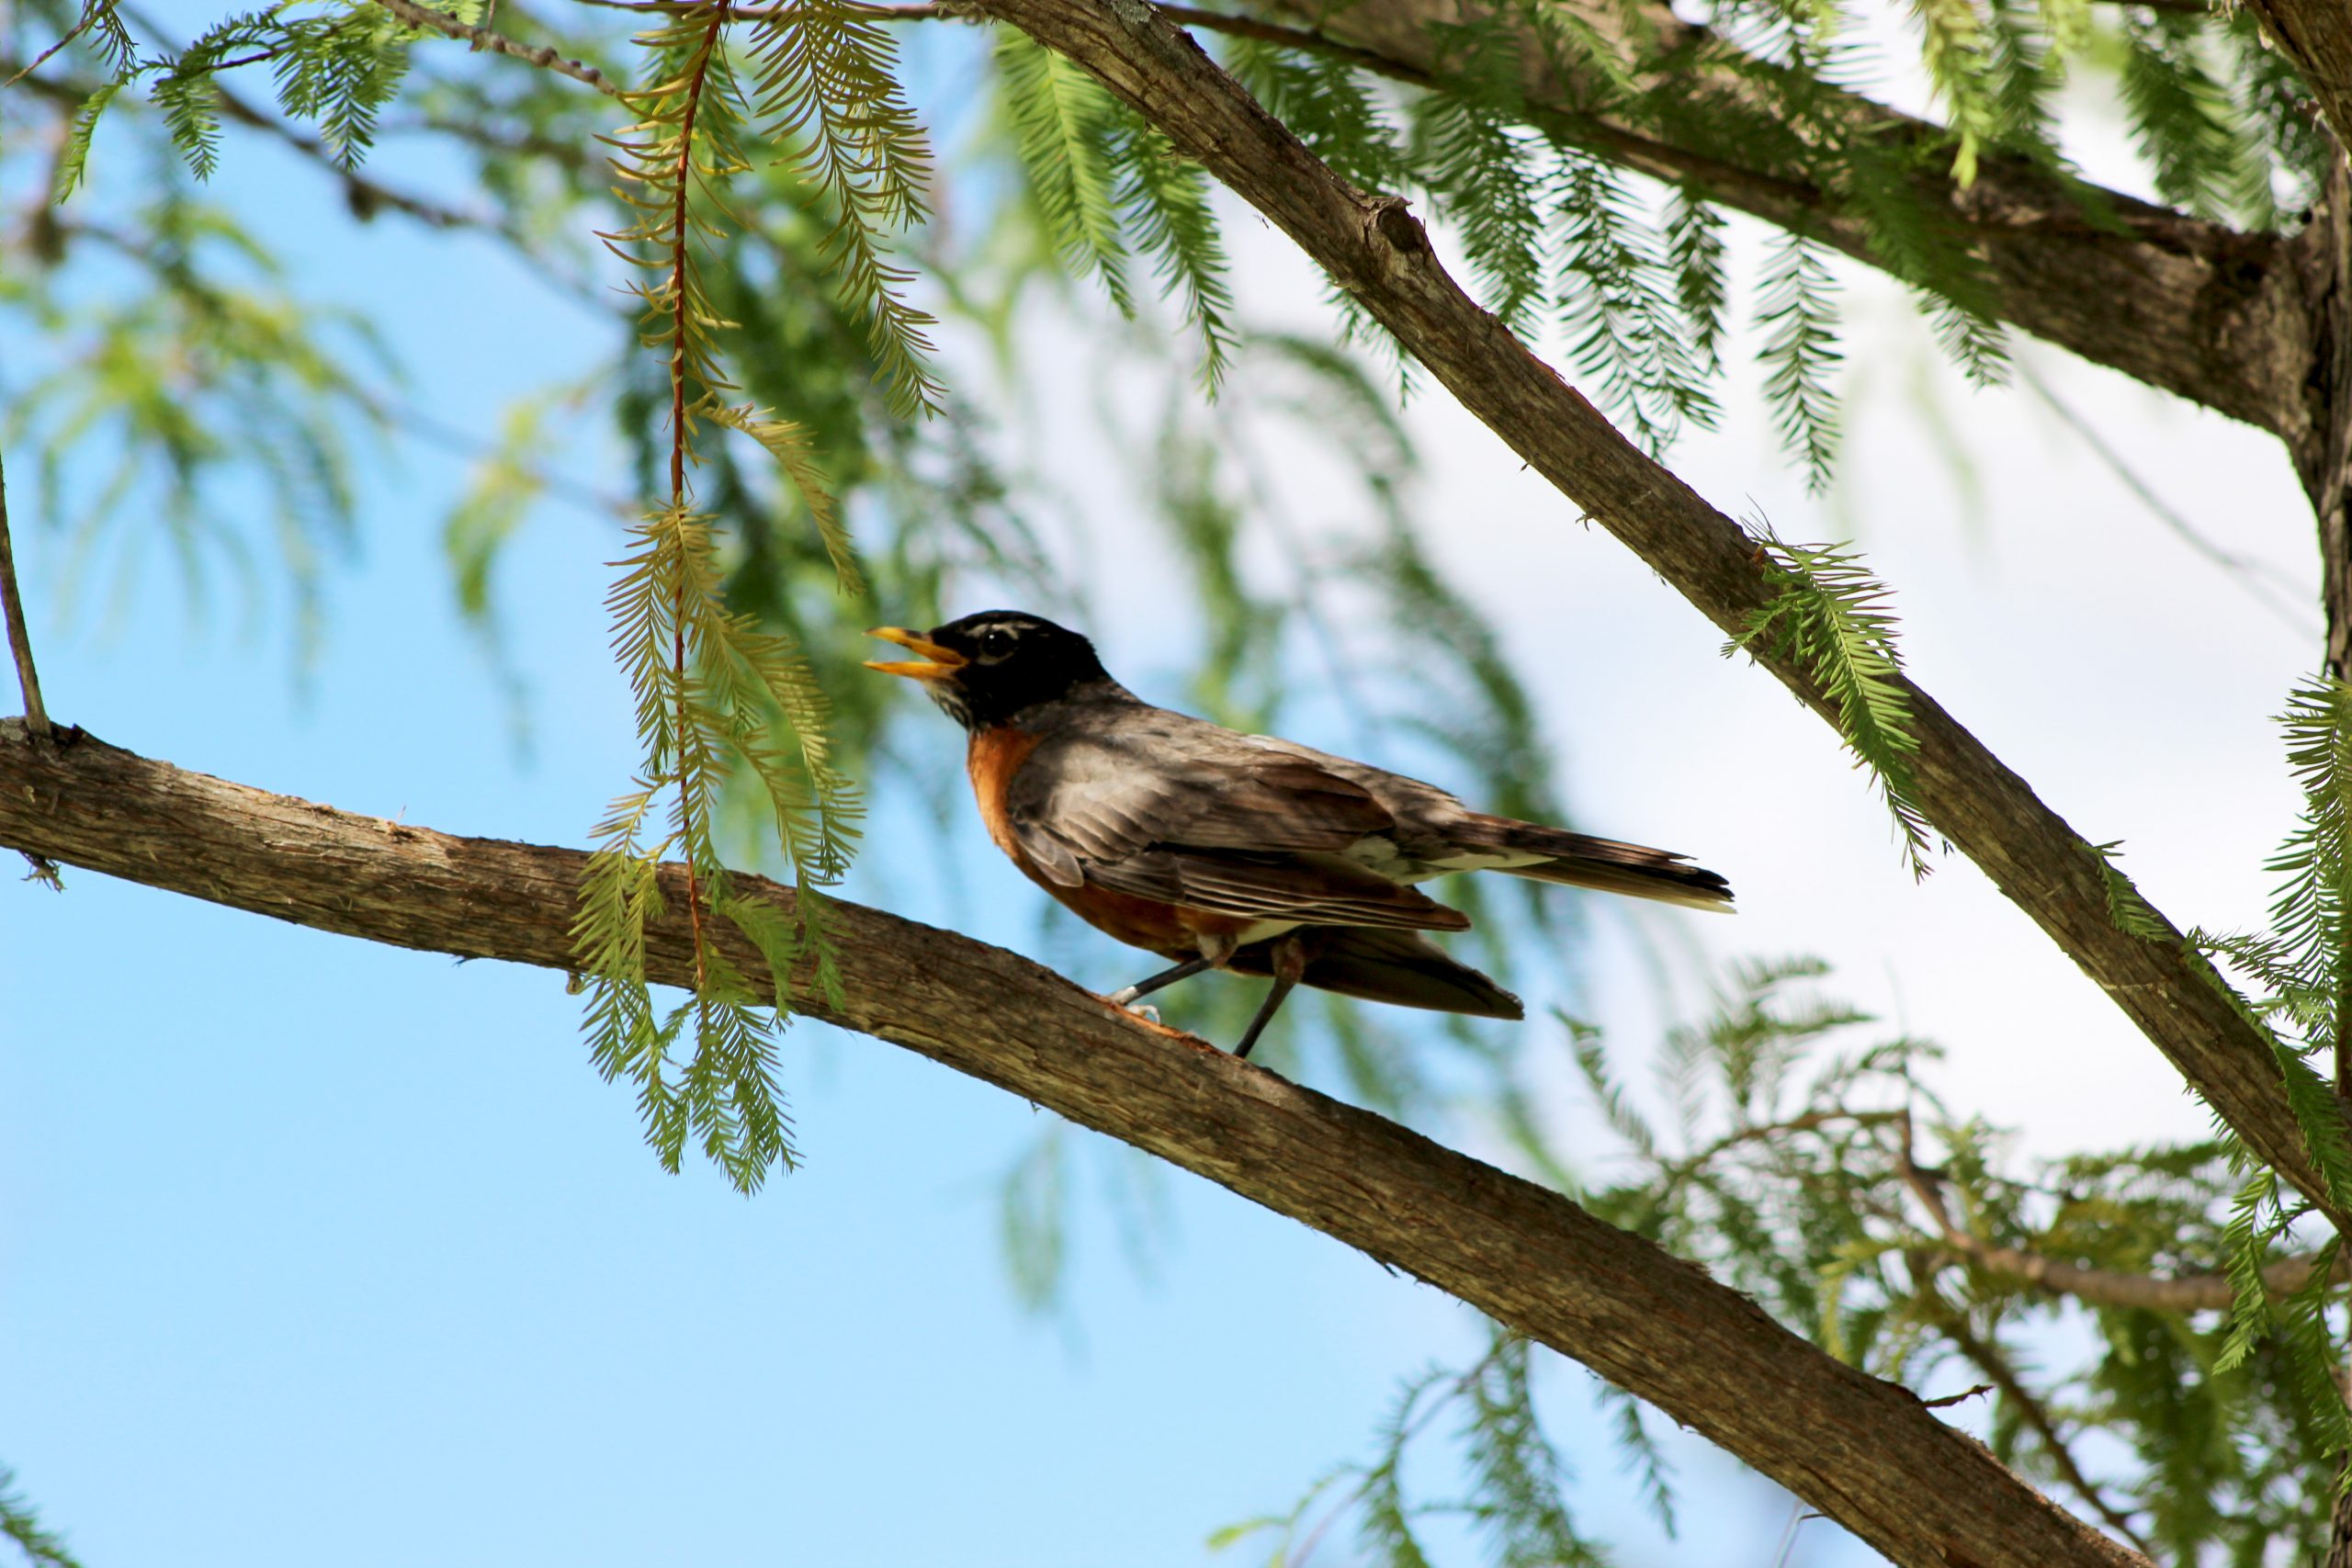 A young bird sings a song from a shaded tree branch.